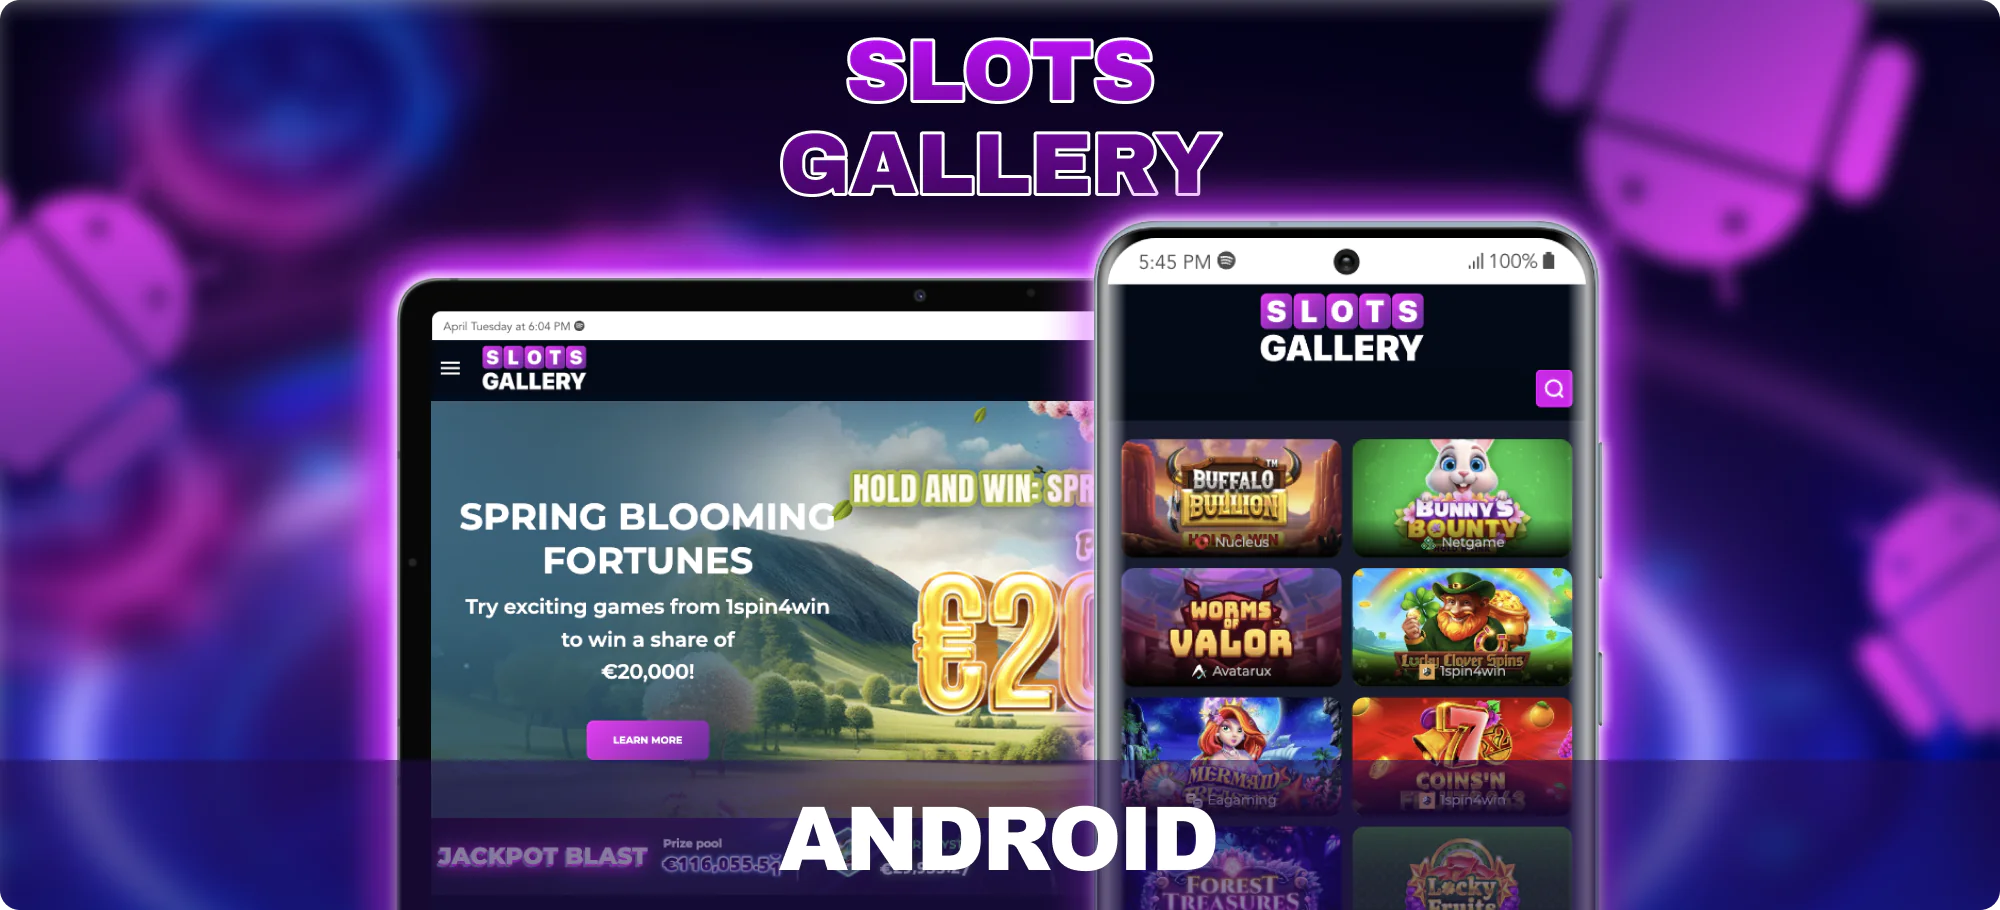 Compatible Android devices - Slots Gallery Mobile App